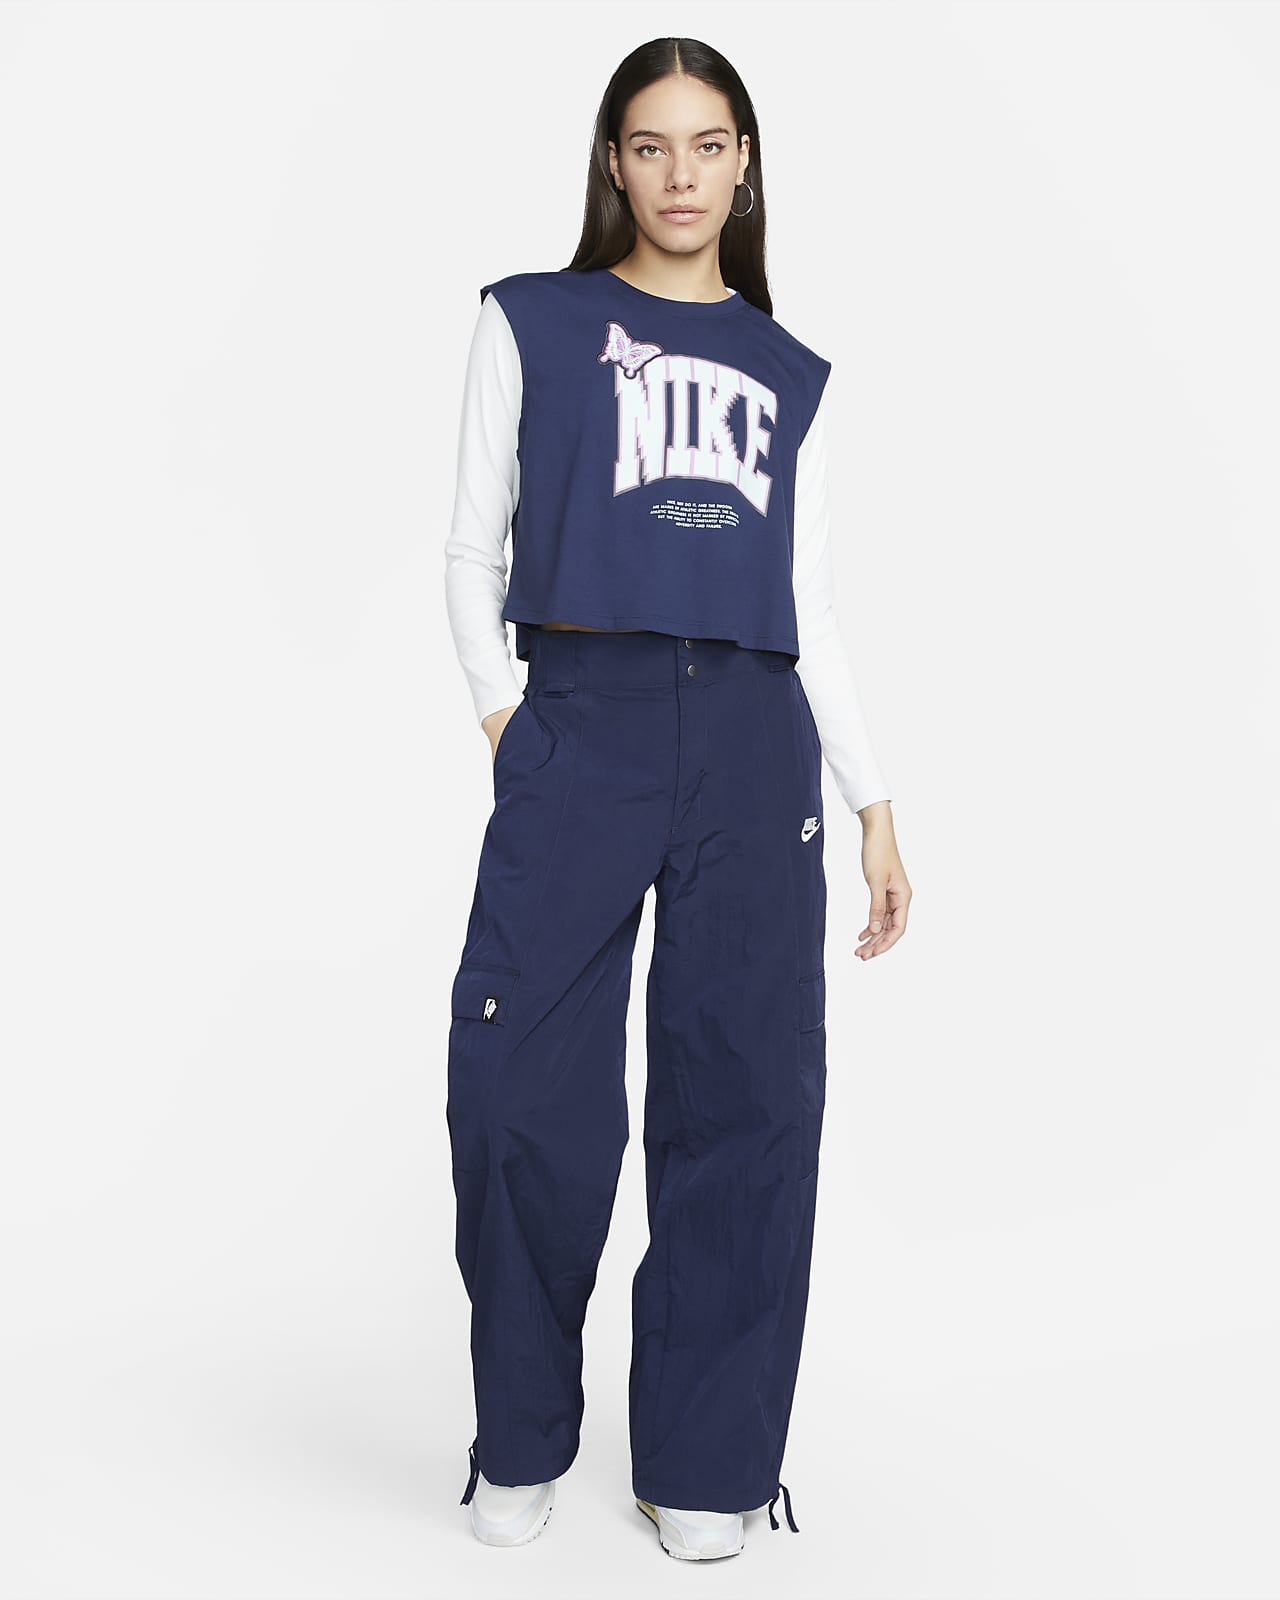 https://static.nike.com/a/images/t_PDP_1280_v1/f_auto,q_auto:eco/b709a6e1-3338-482a-8bc1-260f548646fe/sportswear-oversized-high-waisted-woven-cargo-trousers-vnBPC4.png